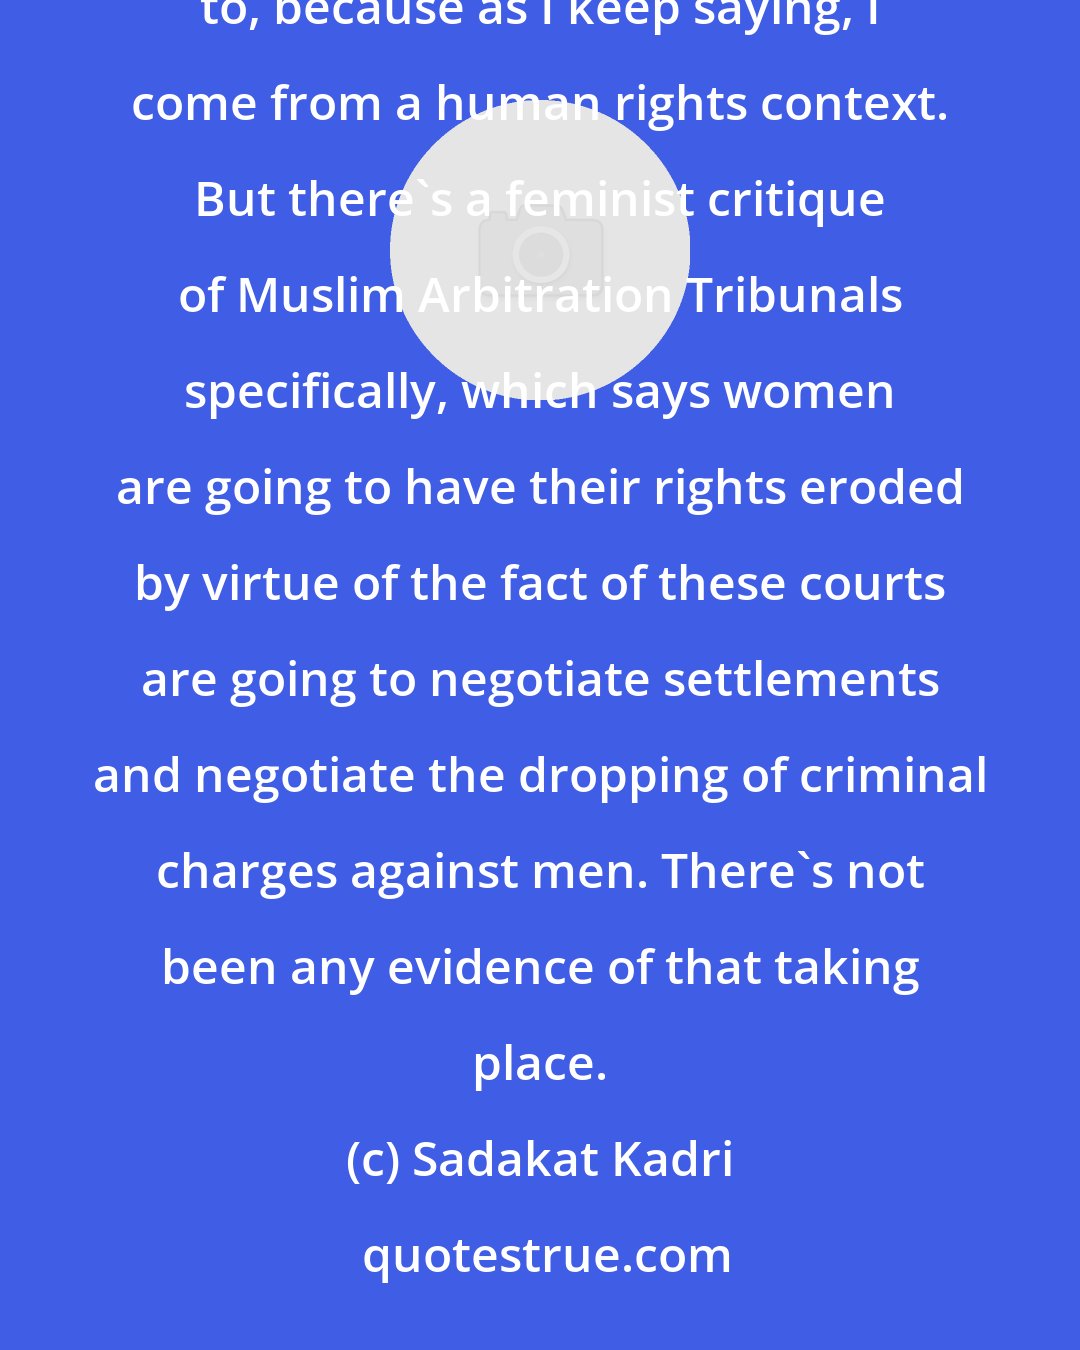 Sadakat Kadri: There's a feminist critique of Muslim Arbitration Tribunals, which I'm certainly not unsympathetic to, because as I keep saying, I come from a human rights context. But there's a feminist critique of Muslim Arbitration Tribunals specifically, which says women are going to have their rights eroded by virtue of the fact of these courts are going to negotiate settlements and negotiate the dropping of criminal charges against men. There's not been any evidence of that taking place.